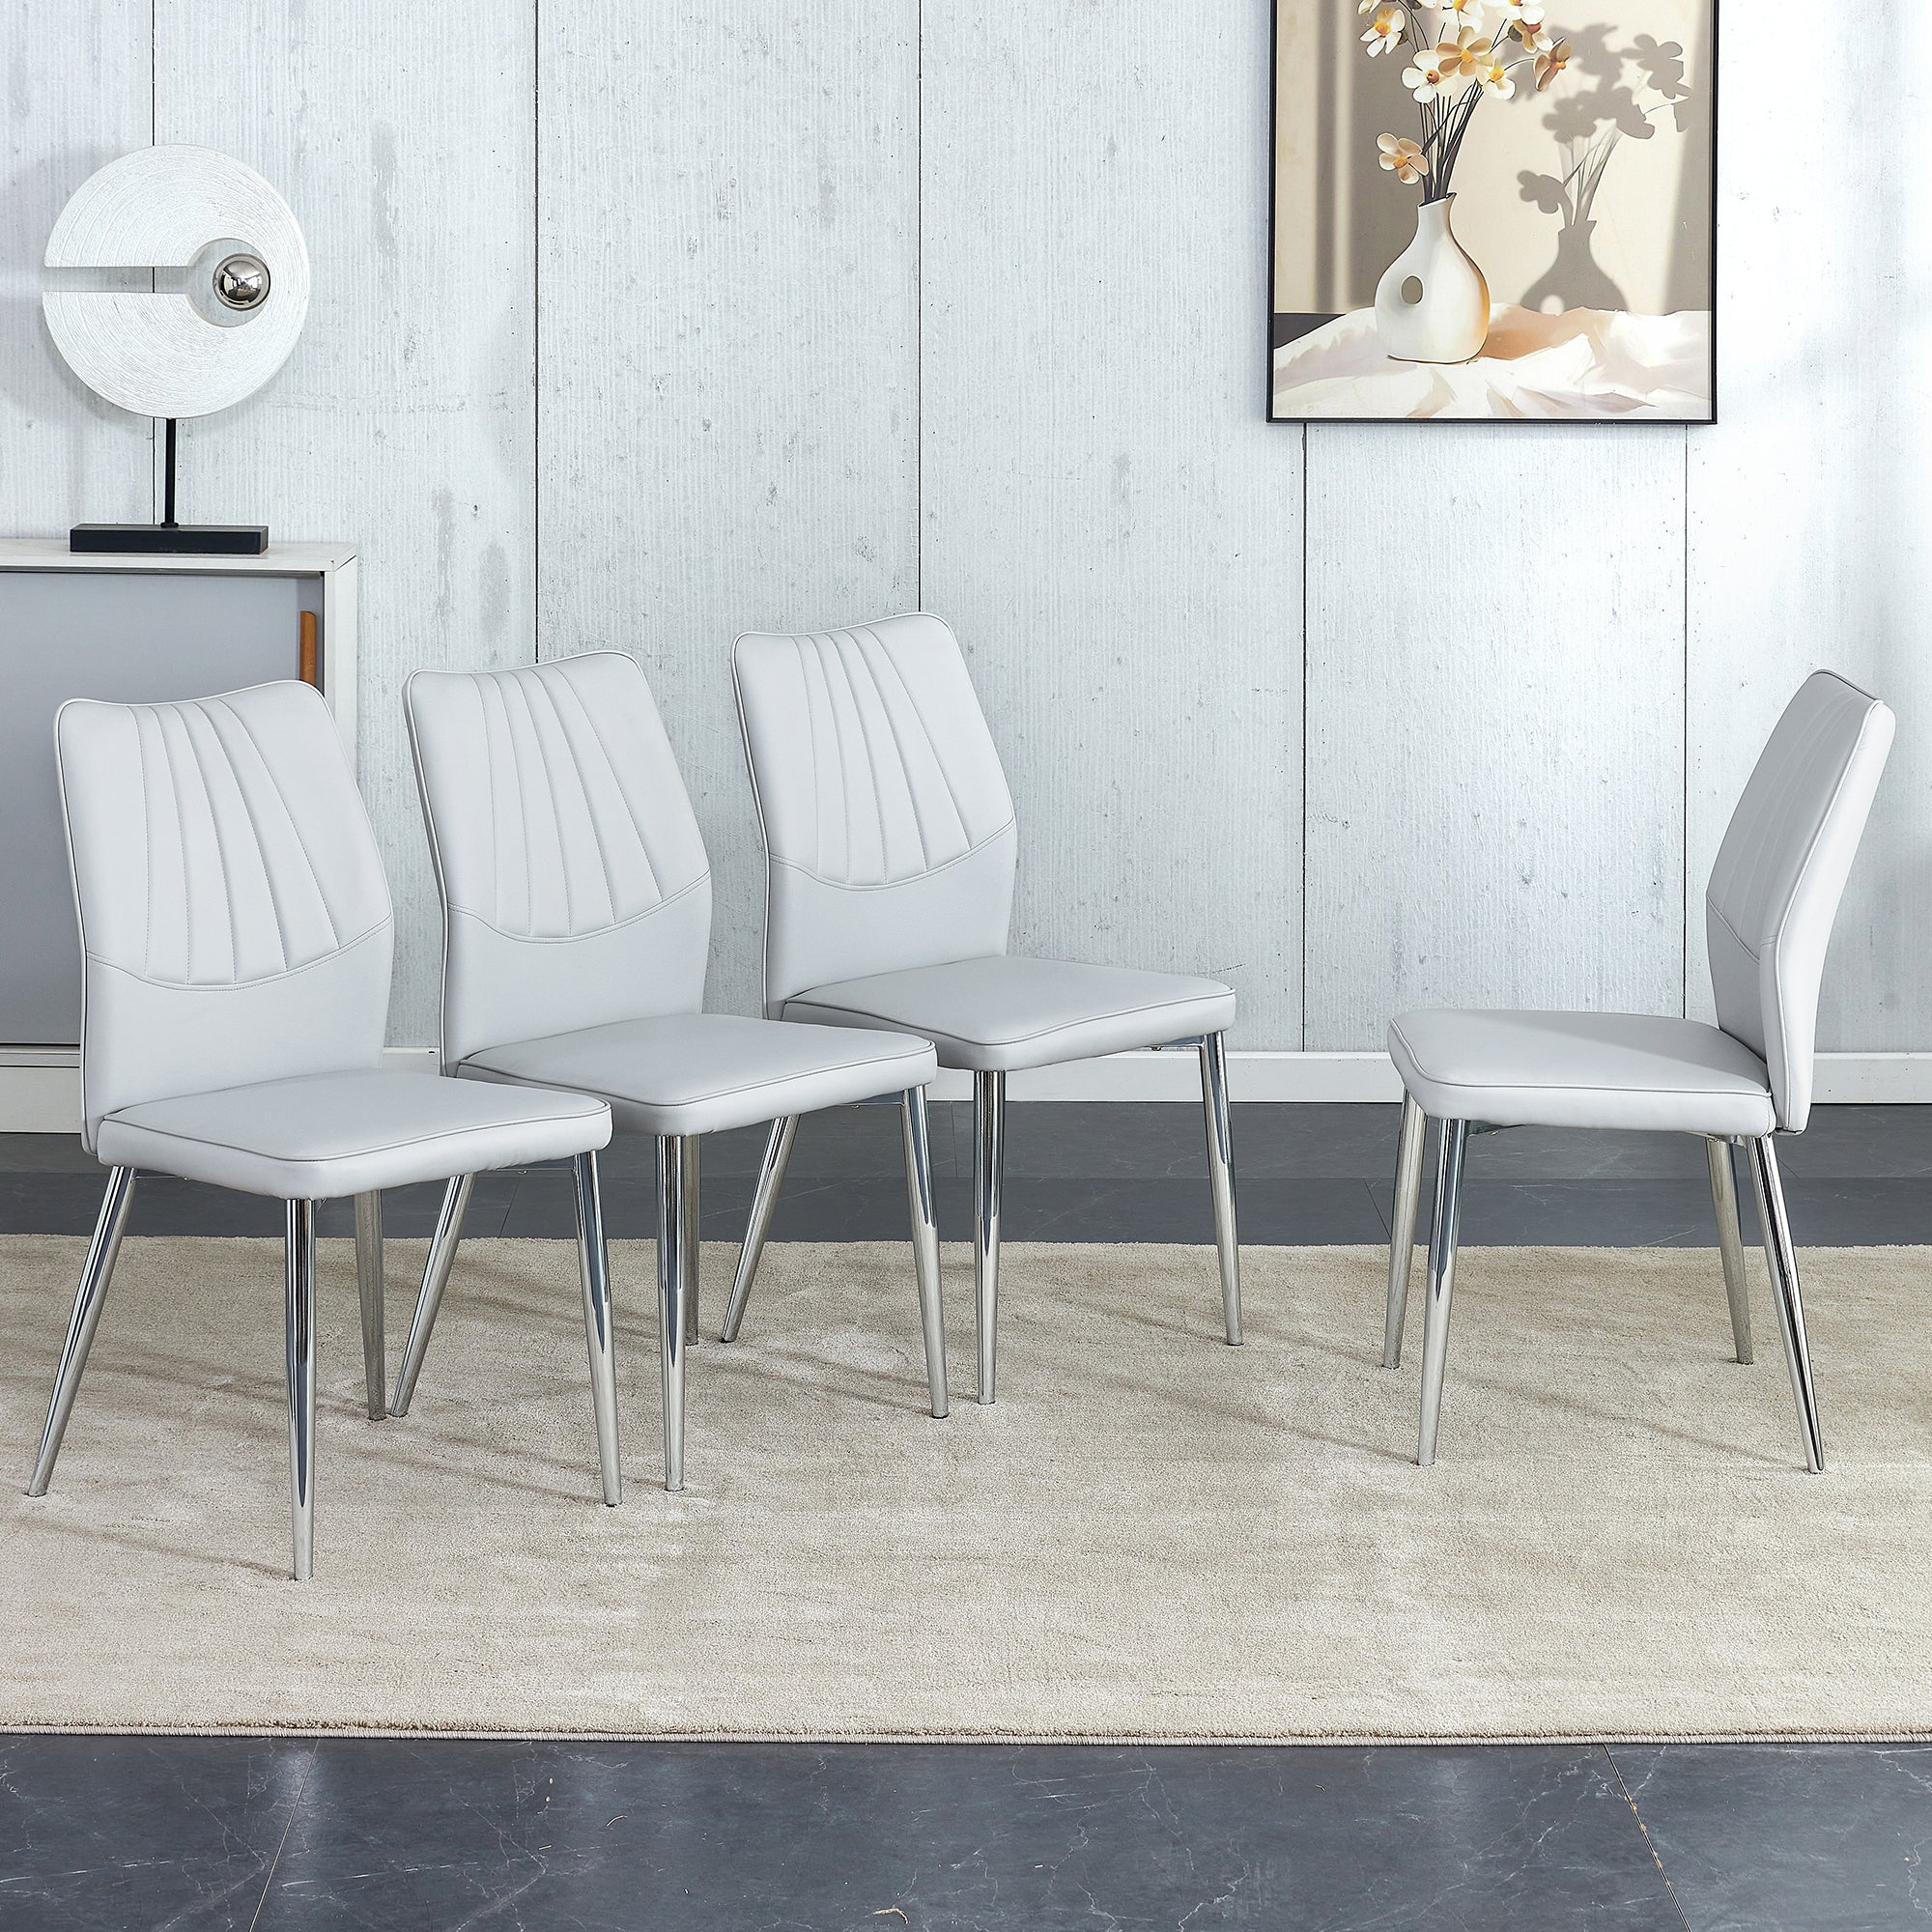 🆓🚛 6 Light Gray Dining Chairs Modern Chairs From The Middle Ages Made of Pu Material Cushion & Silver Metal Legs Suitable for Restaurants & Living Rooms C-009